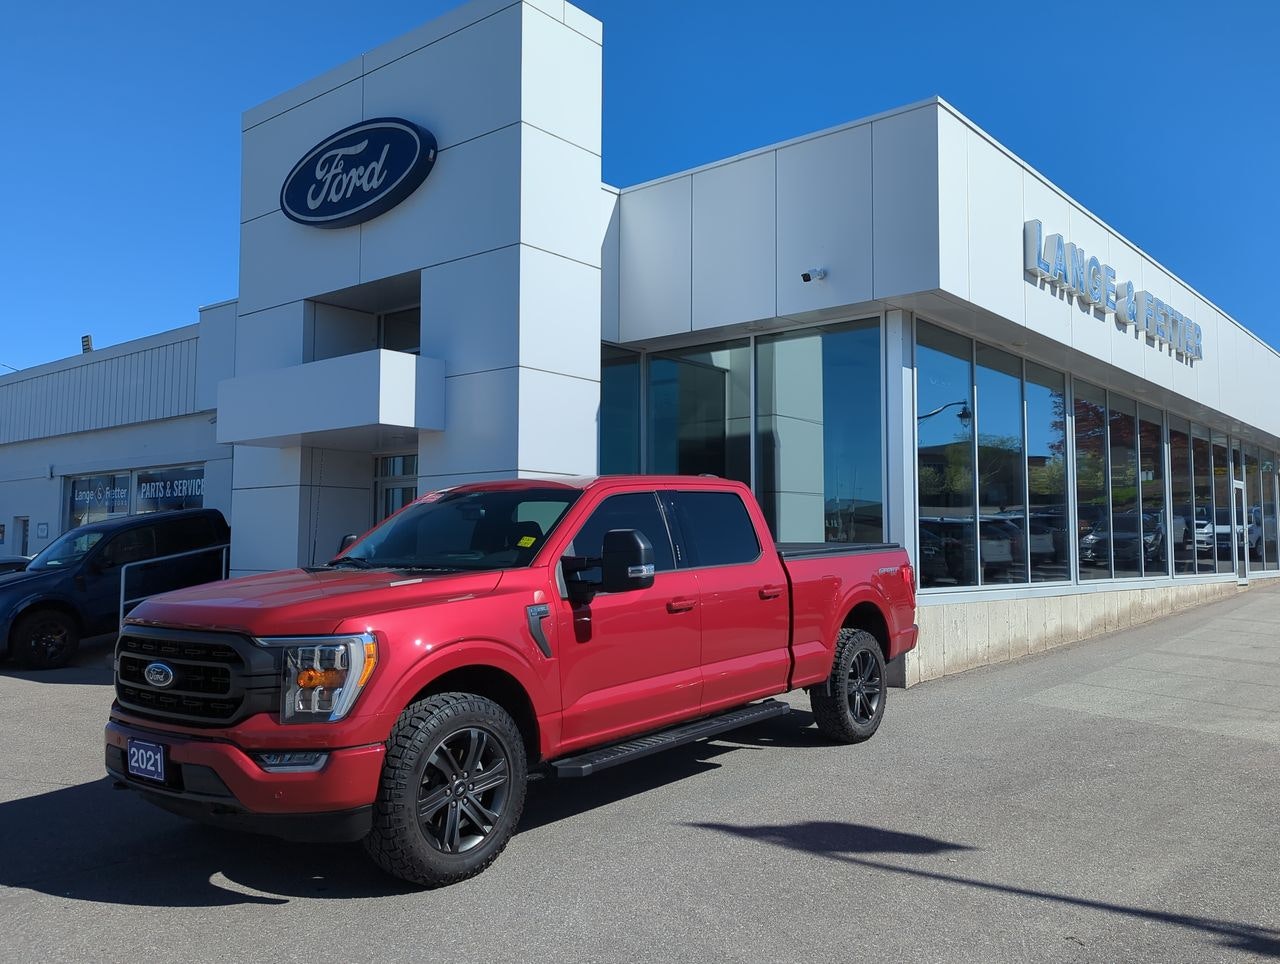 2021 Ford F-150 - 21674A Full Image 1